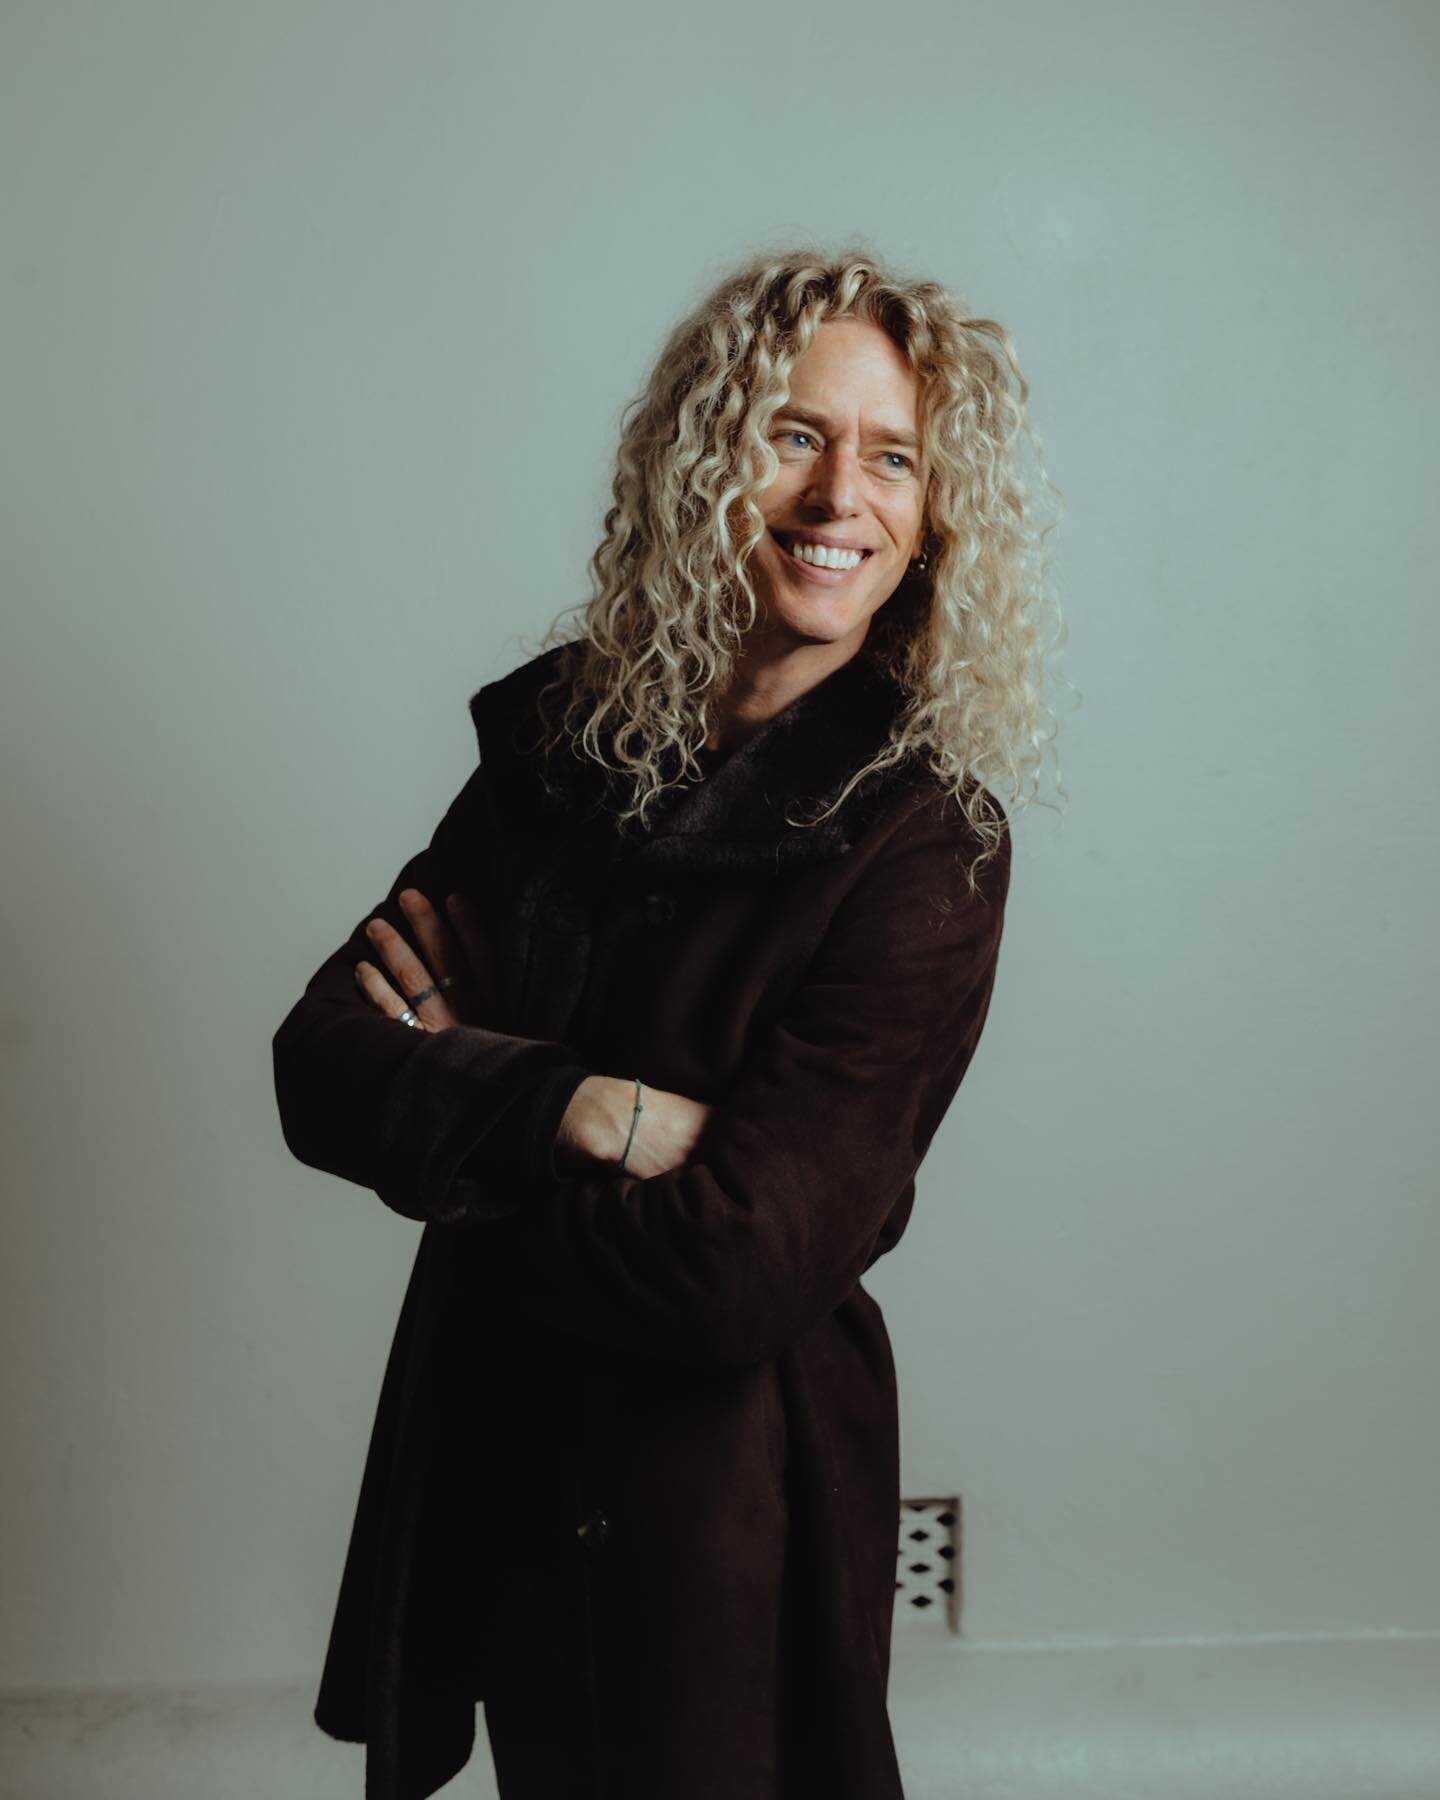 Meet the artists

Phil Joel

Imported from New Zealand, Phil Joel spent 16 years with the Newsboys while also making numerous solo records. His latest recordings reflect his heart for the planet and  the people who live on it.